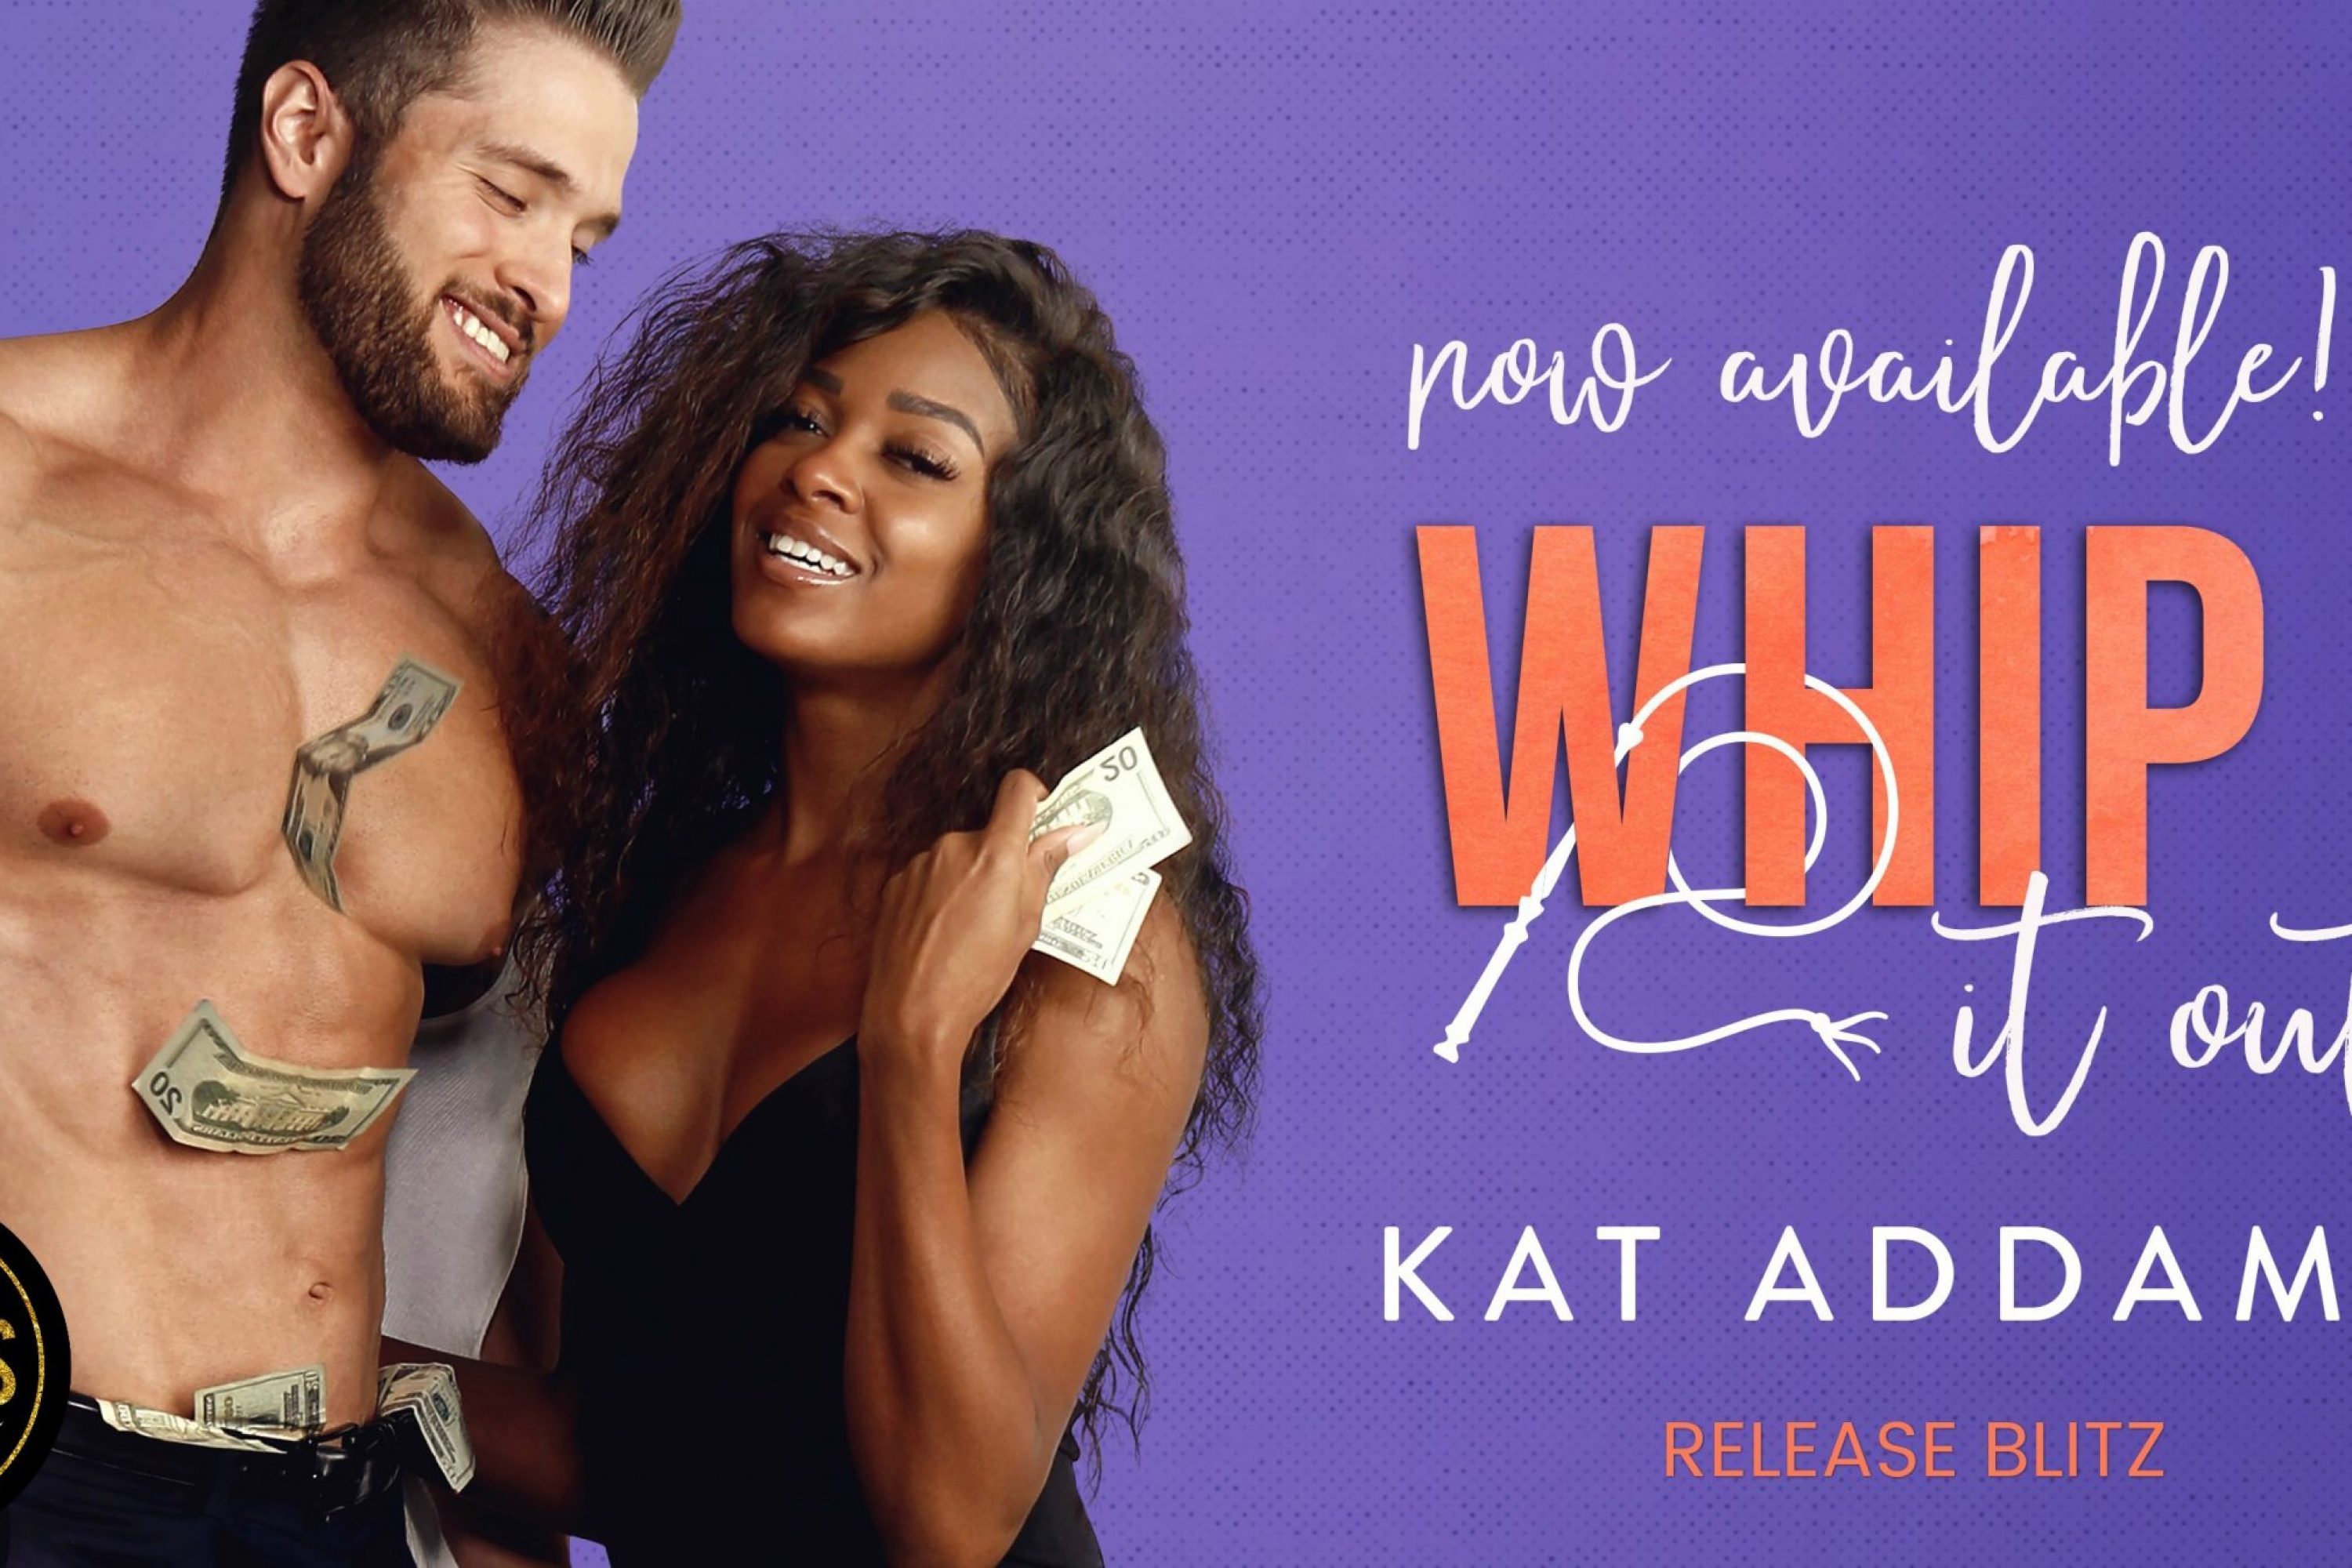 Release Blitz: Whip It Out by Kat Addams